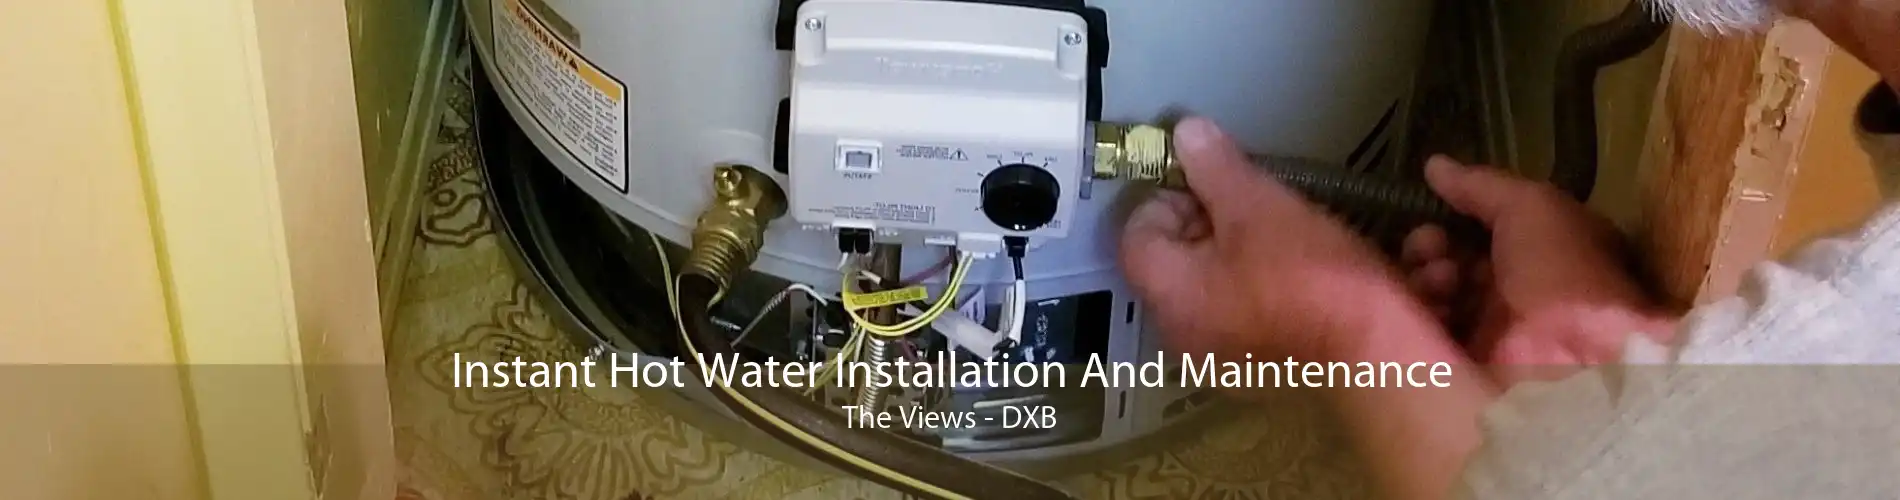 Instant Hot Water Installation And Maintenance The Views - DXB